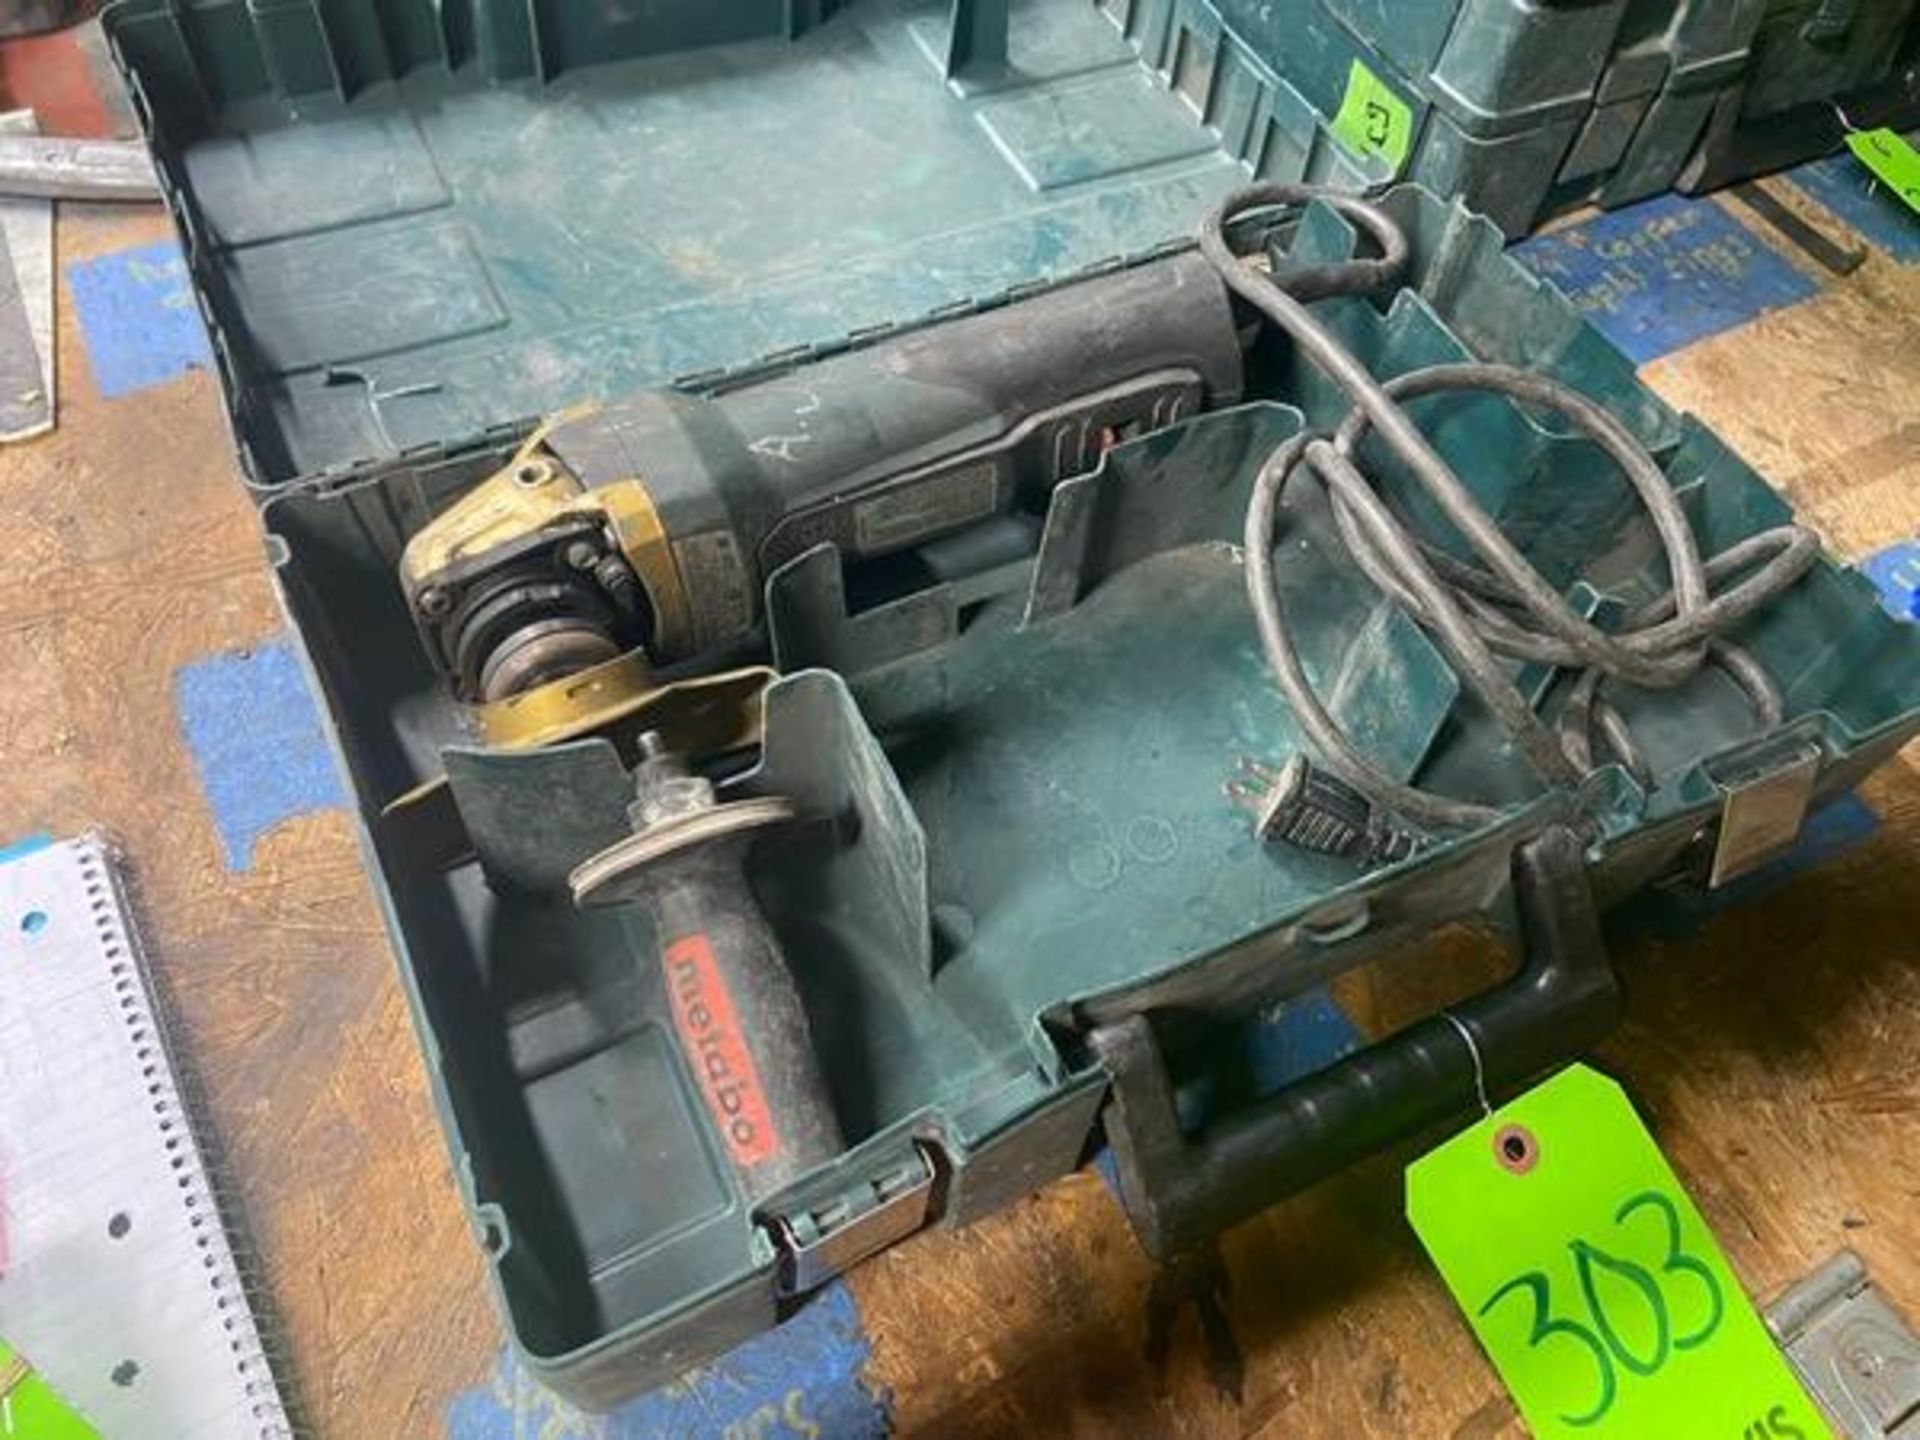 Metabo 6" Grinder, with Power Cord & Handle, with Hard Case (LOCATED IN MONROEVILLE, PA) - Image 2 of 6